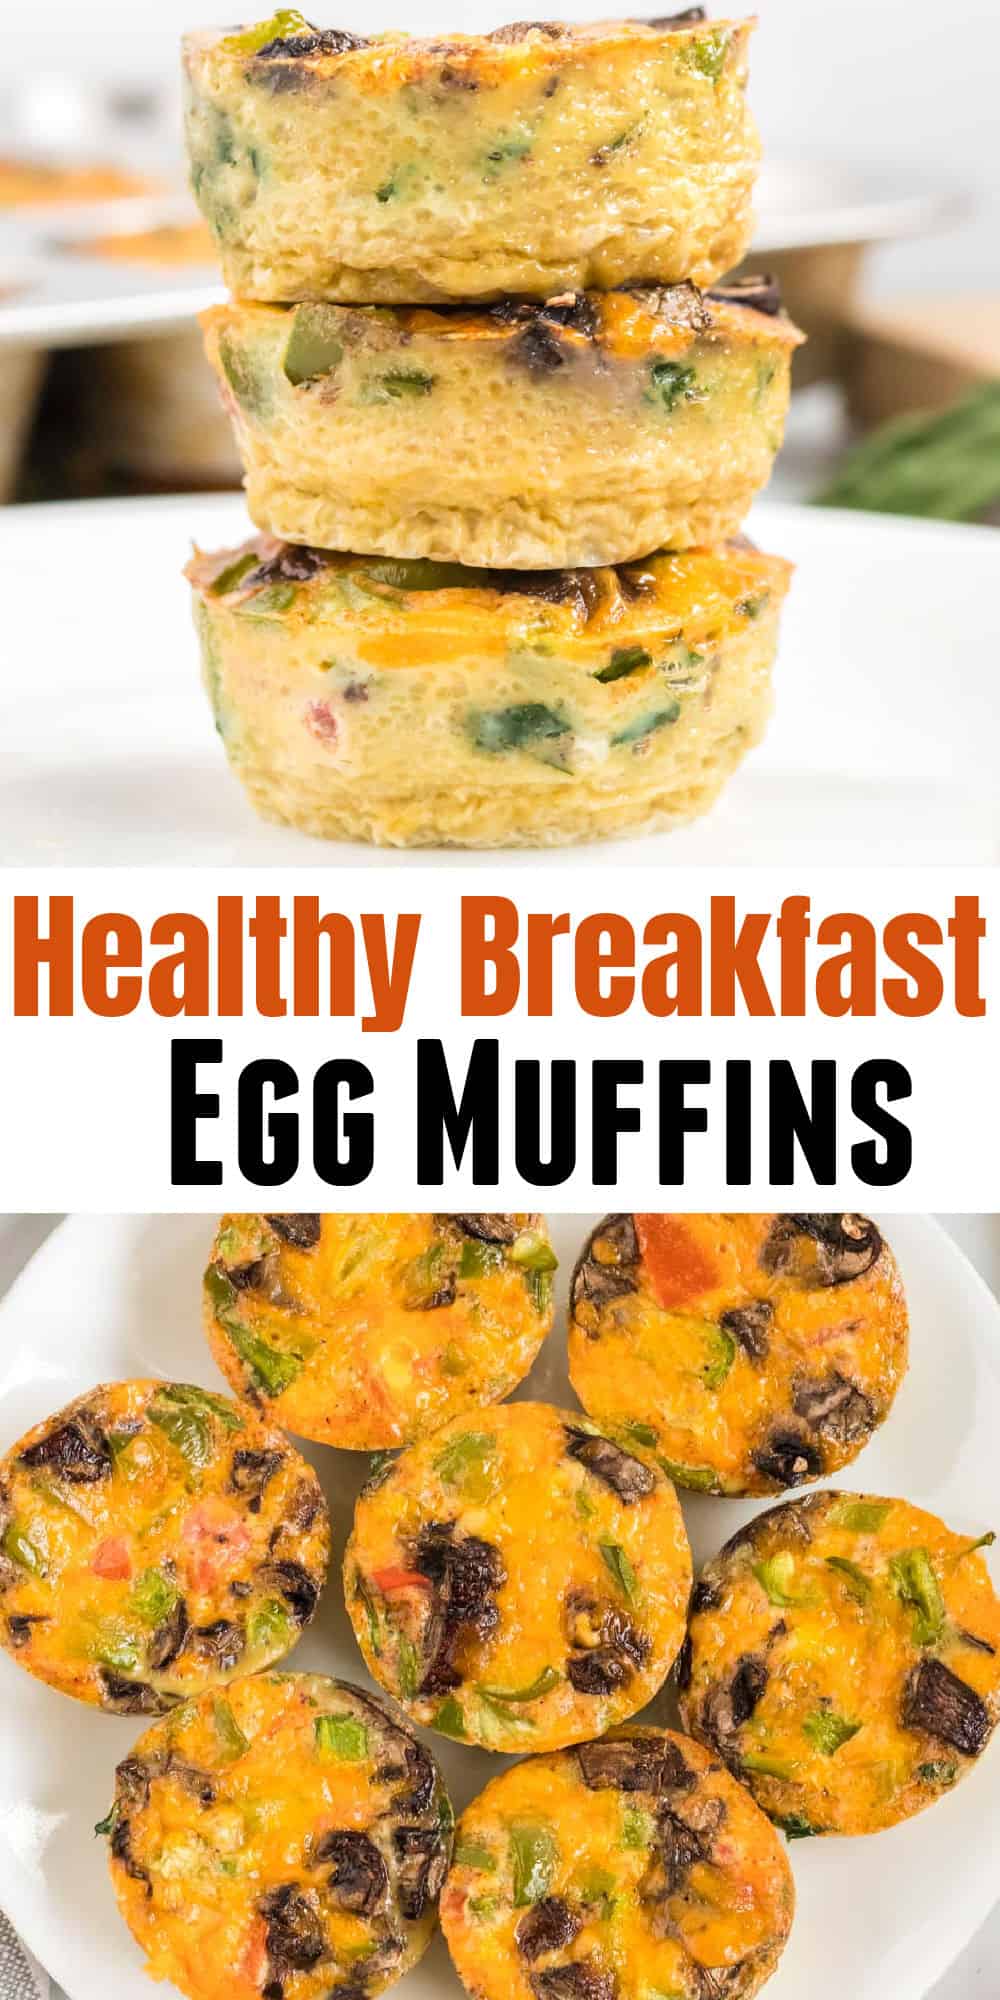 image with text "healthy breakfast egg muffins"